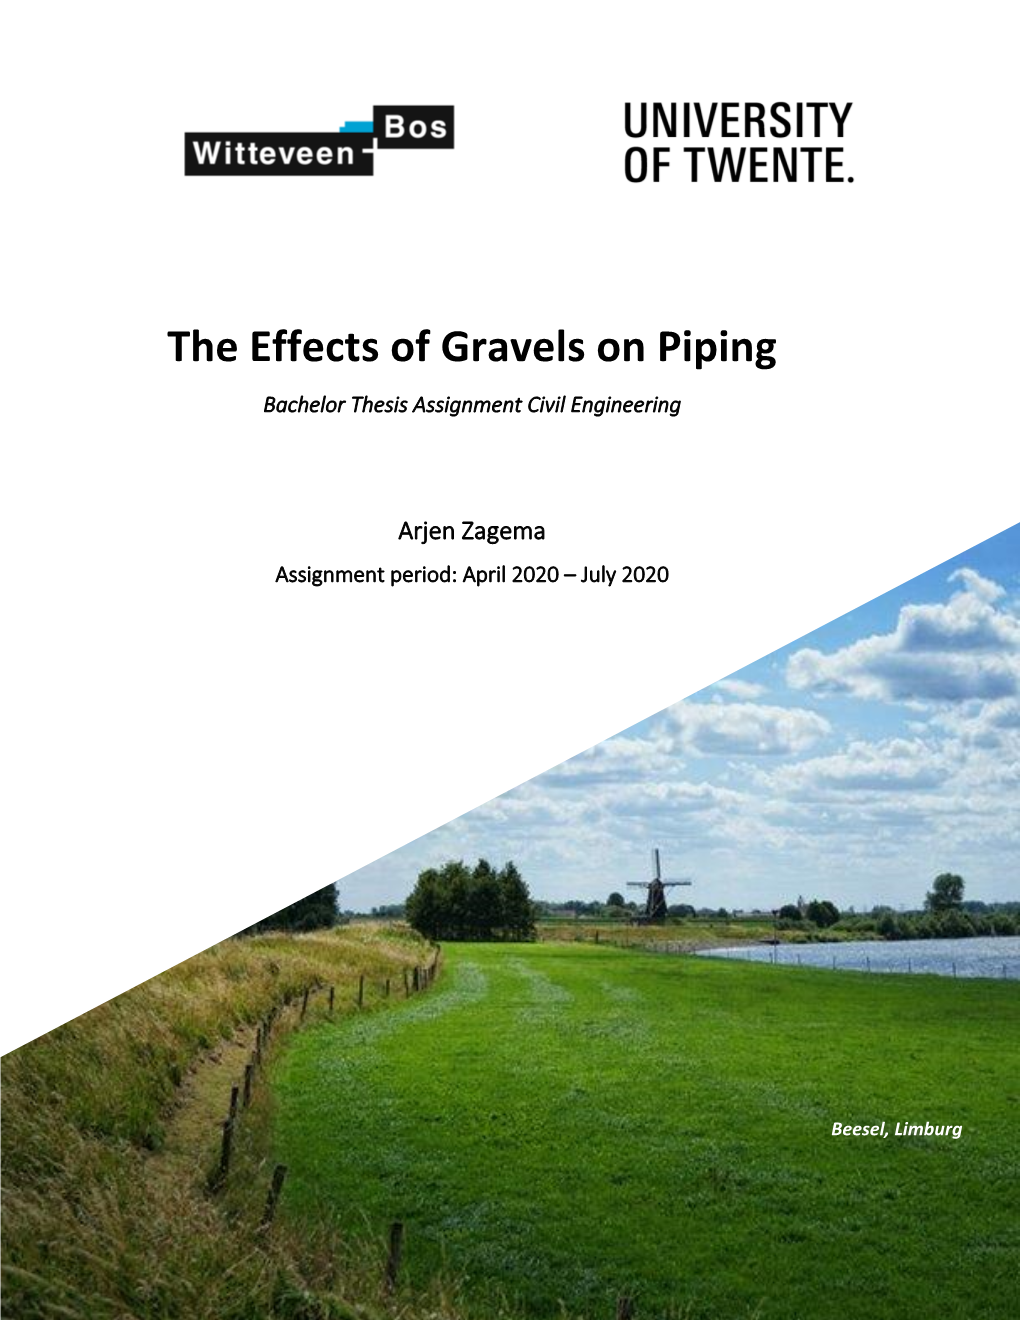 The Effects of Gravels on Piping Bachelor Thesis Assignment Civil Engineering